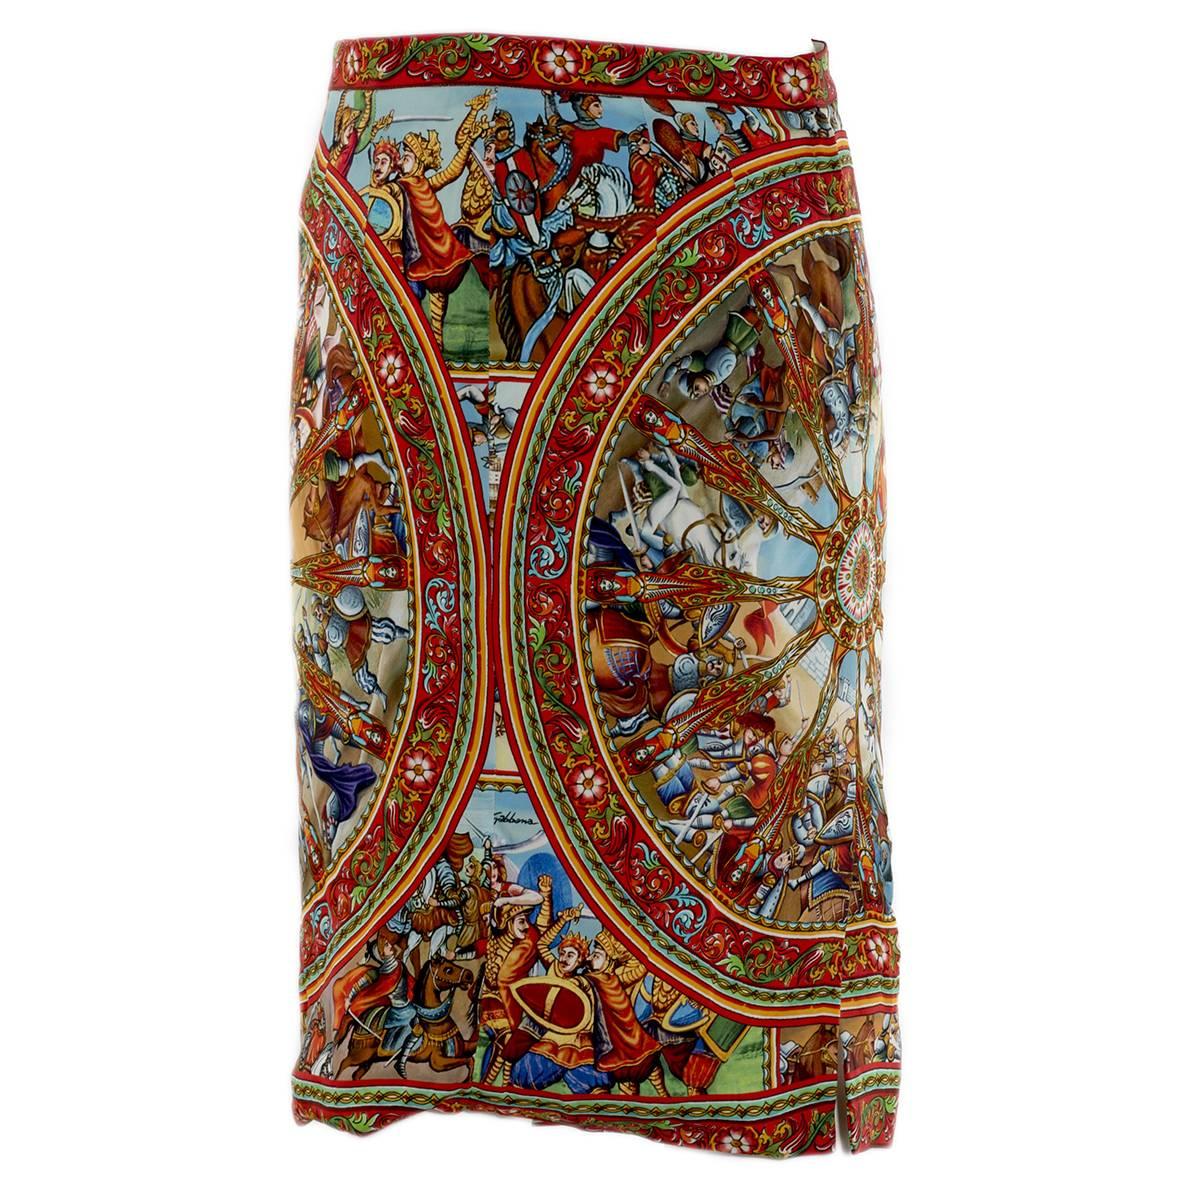 Wonderful skirt by Dolce & Gabbana
2013 Collection
Multicolored pattern
Typical Dolce&Gabbana street scenes of Sicily; puppets and float
Viscose
Silk lining
Italian size 42 (US 8)
Made in Italy
Worldwide express shipping included in the